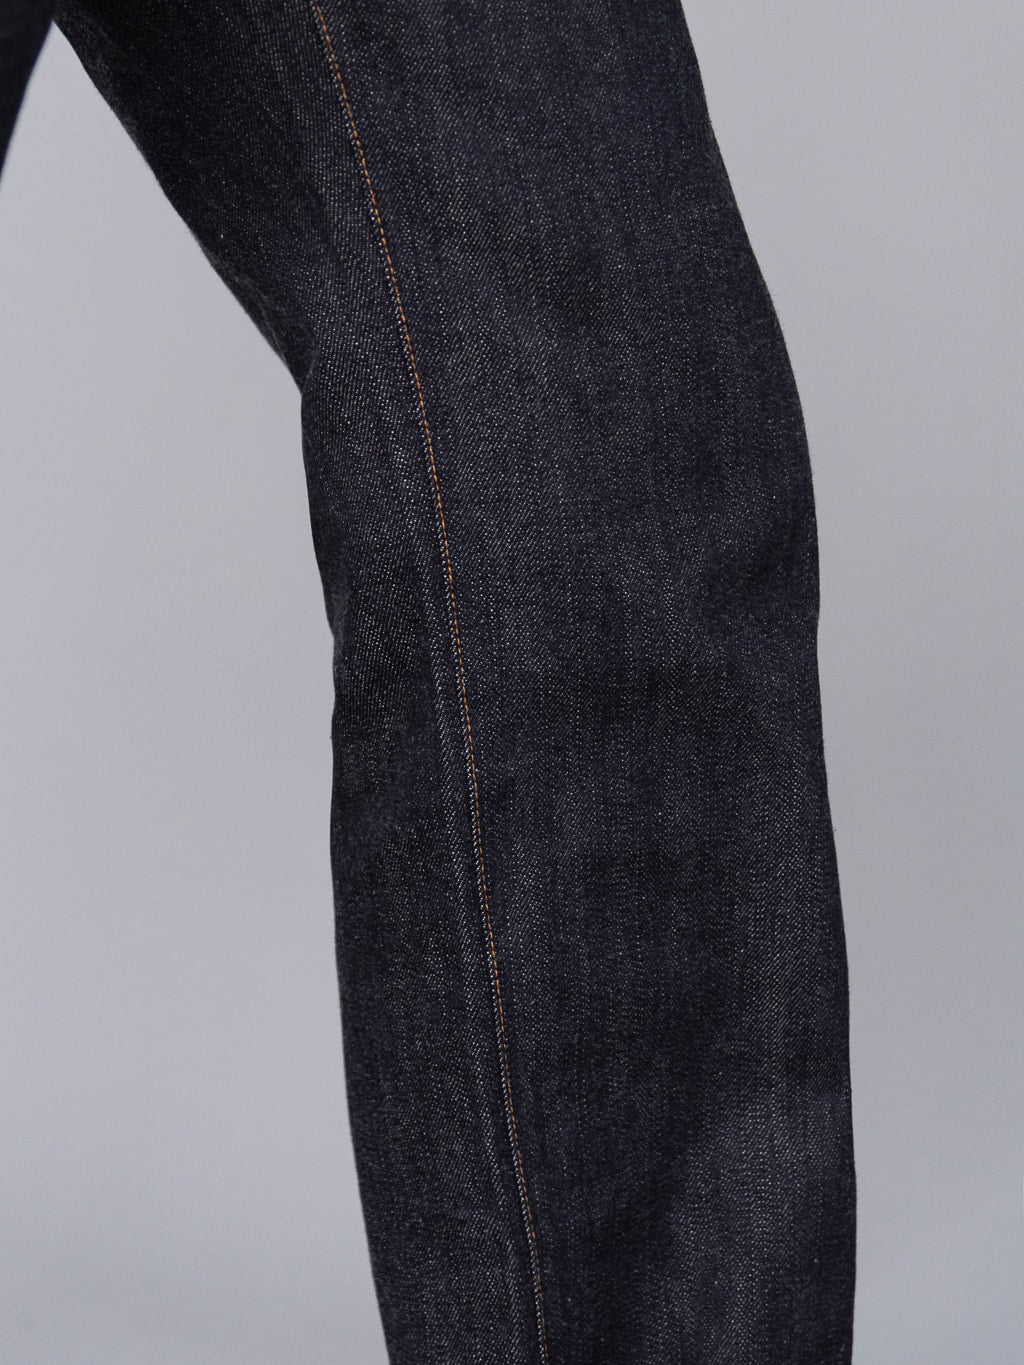 The Flat Head 3009 14.5oz straight tapered Jeans inseam